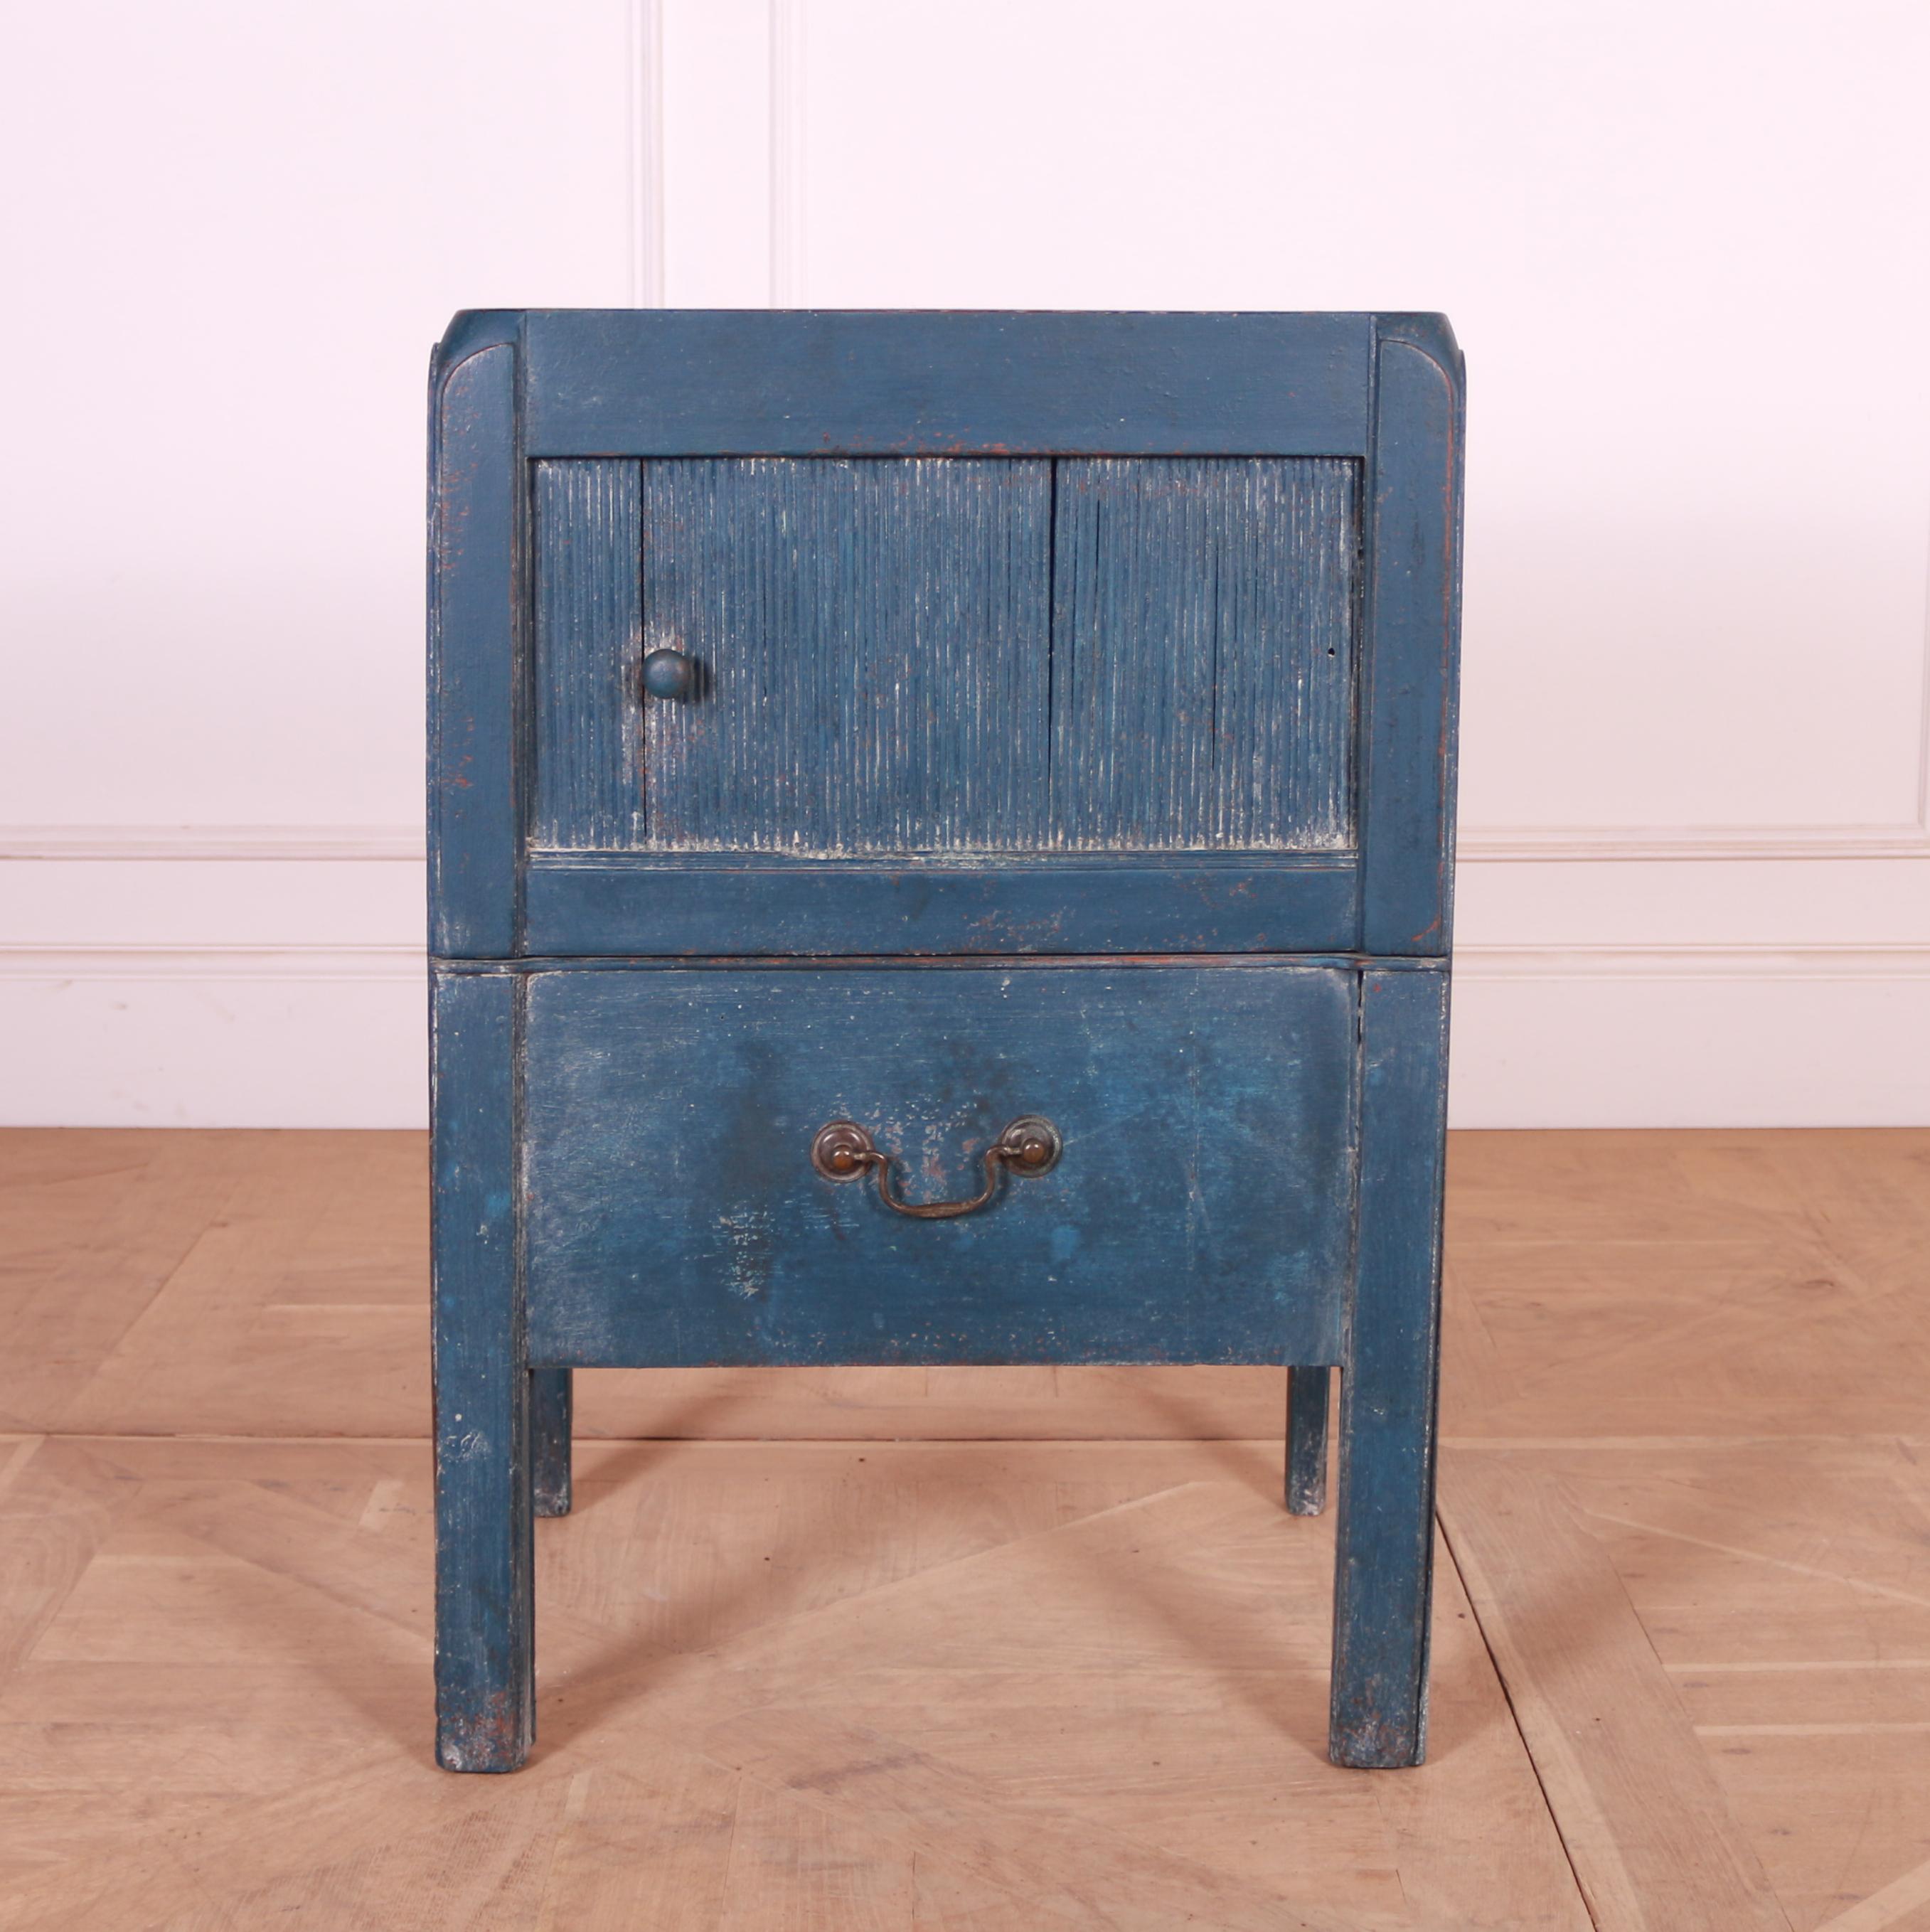 18th C English painted oak tray top bedside cupboard. 1790.

Reference: 7724

Dimensions
20.5 inches (52 cms) Wide
17.5 inches (44 cms) Deep
29.5 inches (75 cms) High